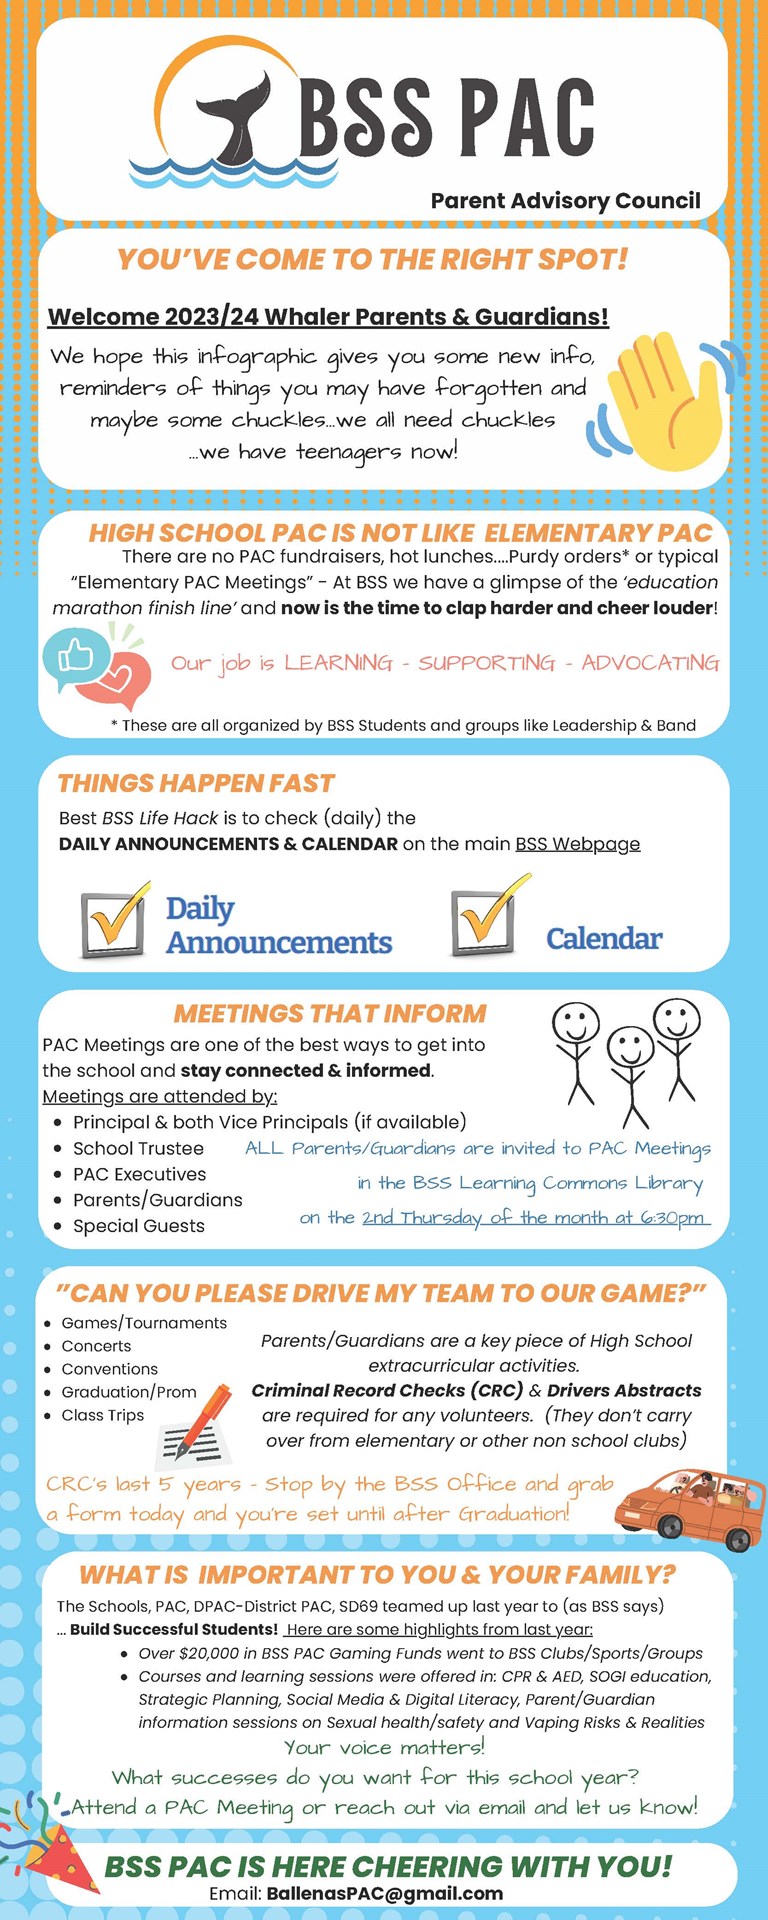 BSS PAC Welcome to 2023 Infographic (002).jpg